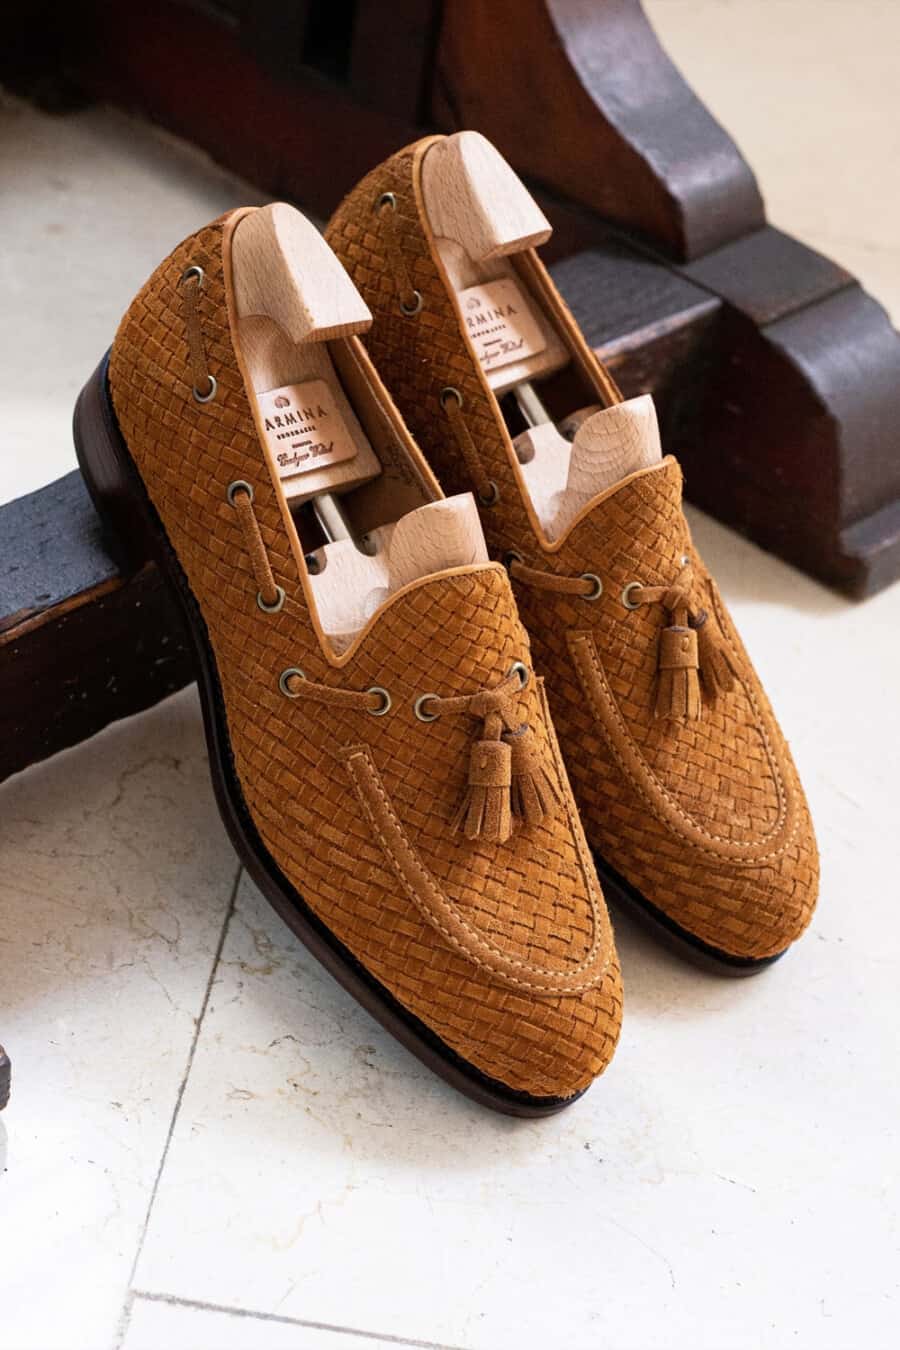 A pair of luxury tan suede woven tassel loafers by Carmina